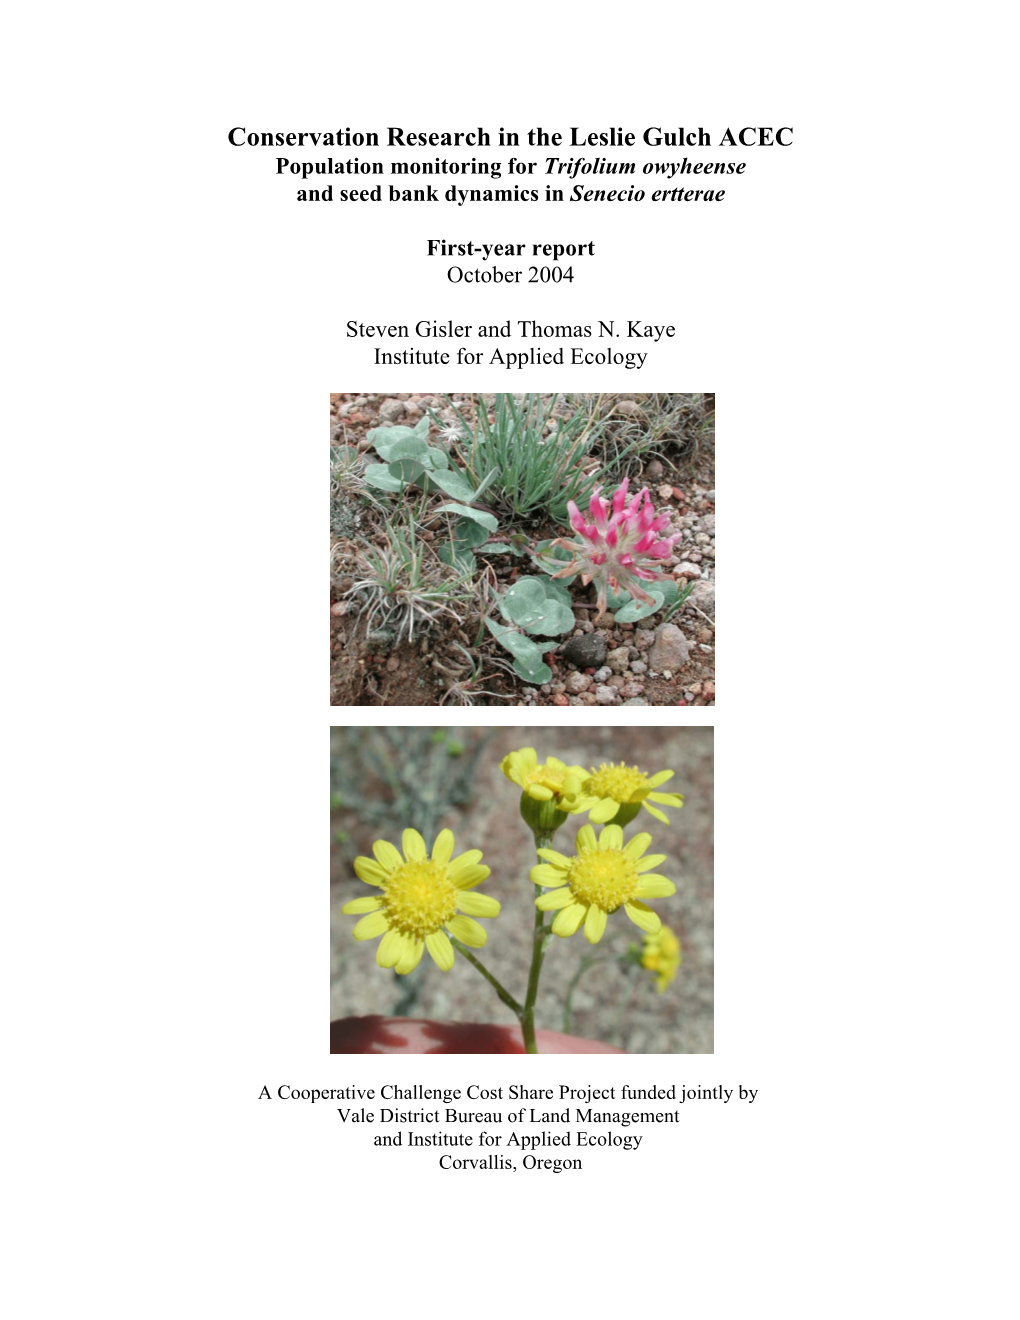 Conservation Research in the Leslie Gulch ACEC Population Monitoring for Trifolium Owyheense and Seed Bank Dynamics in Senecio Ertterae